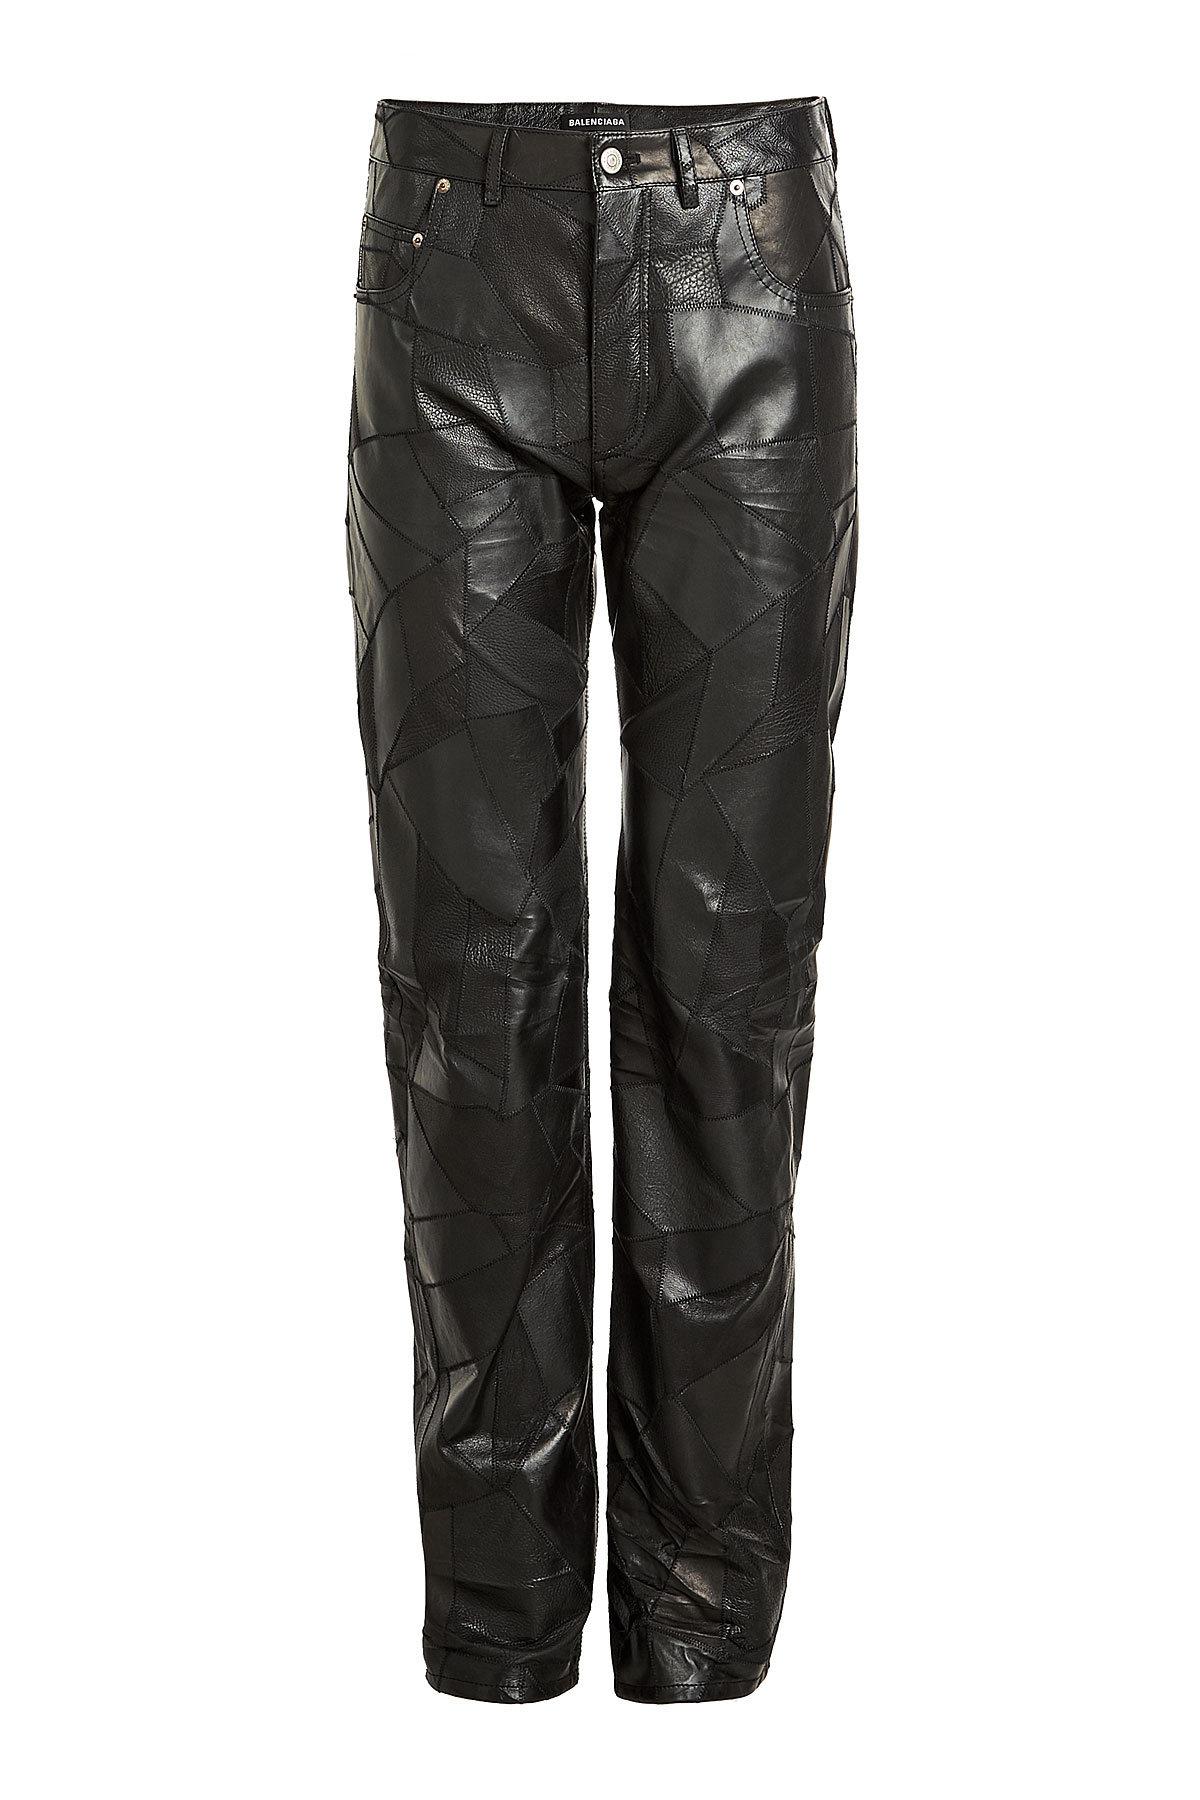 Lyst - Balenciaga Patchwork Leather Pants in Black for Men